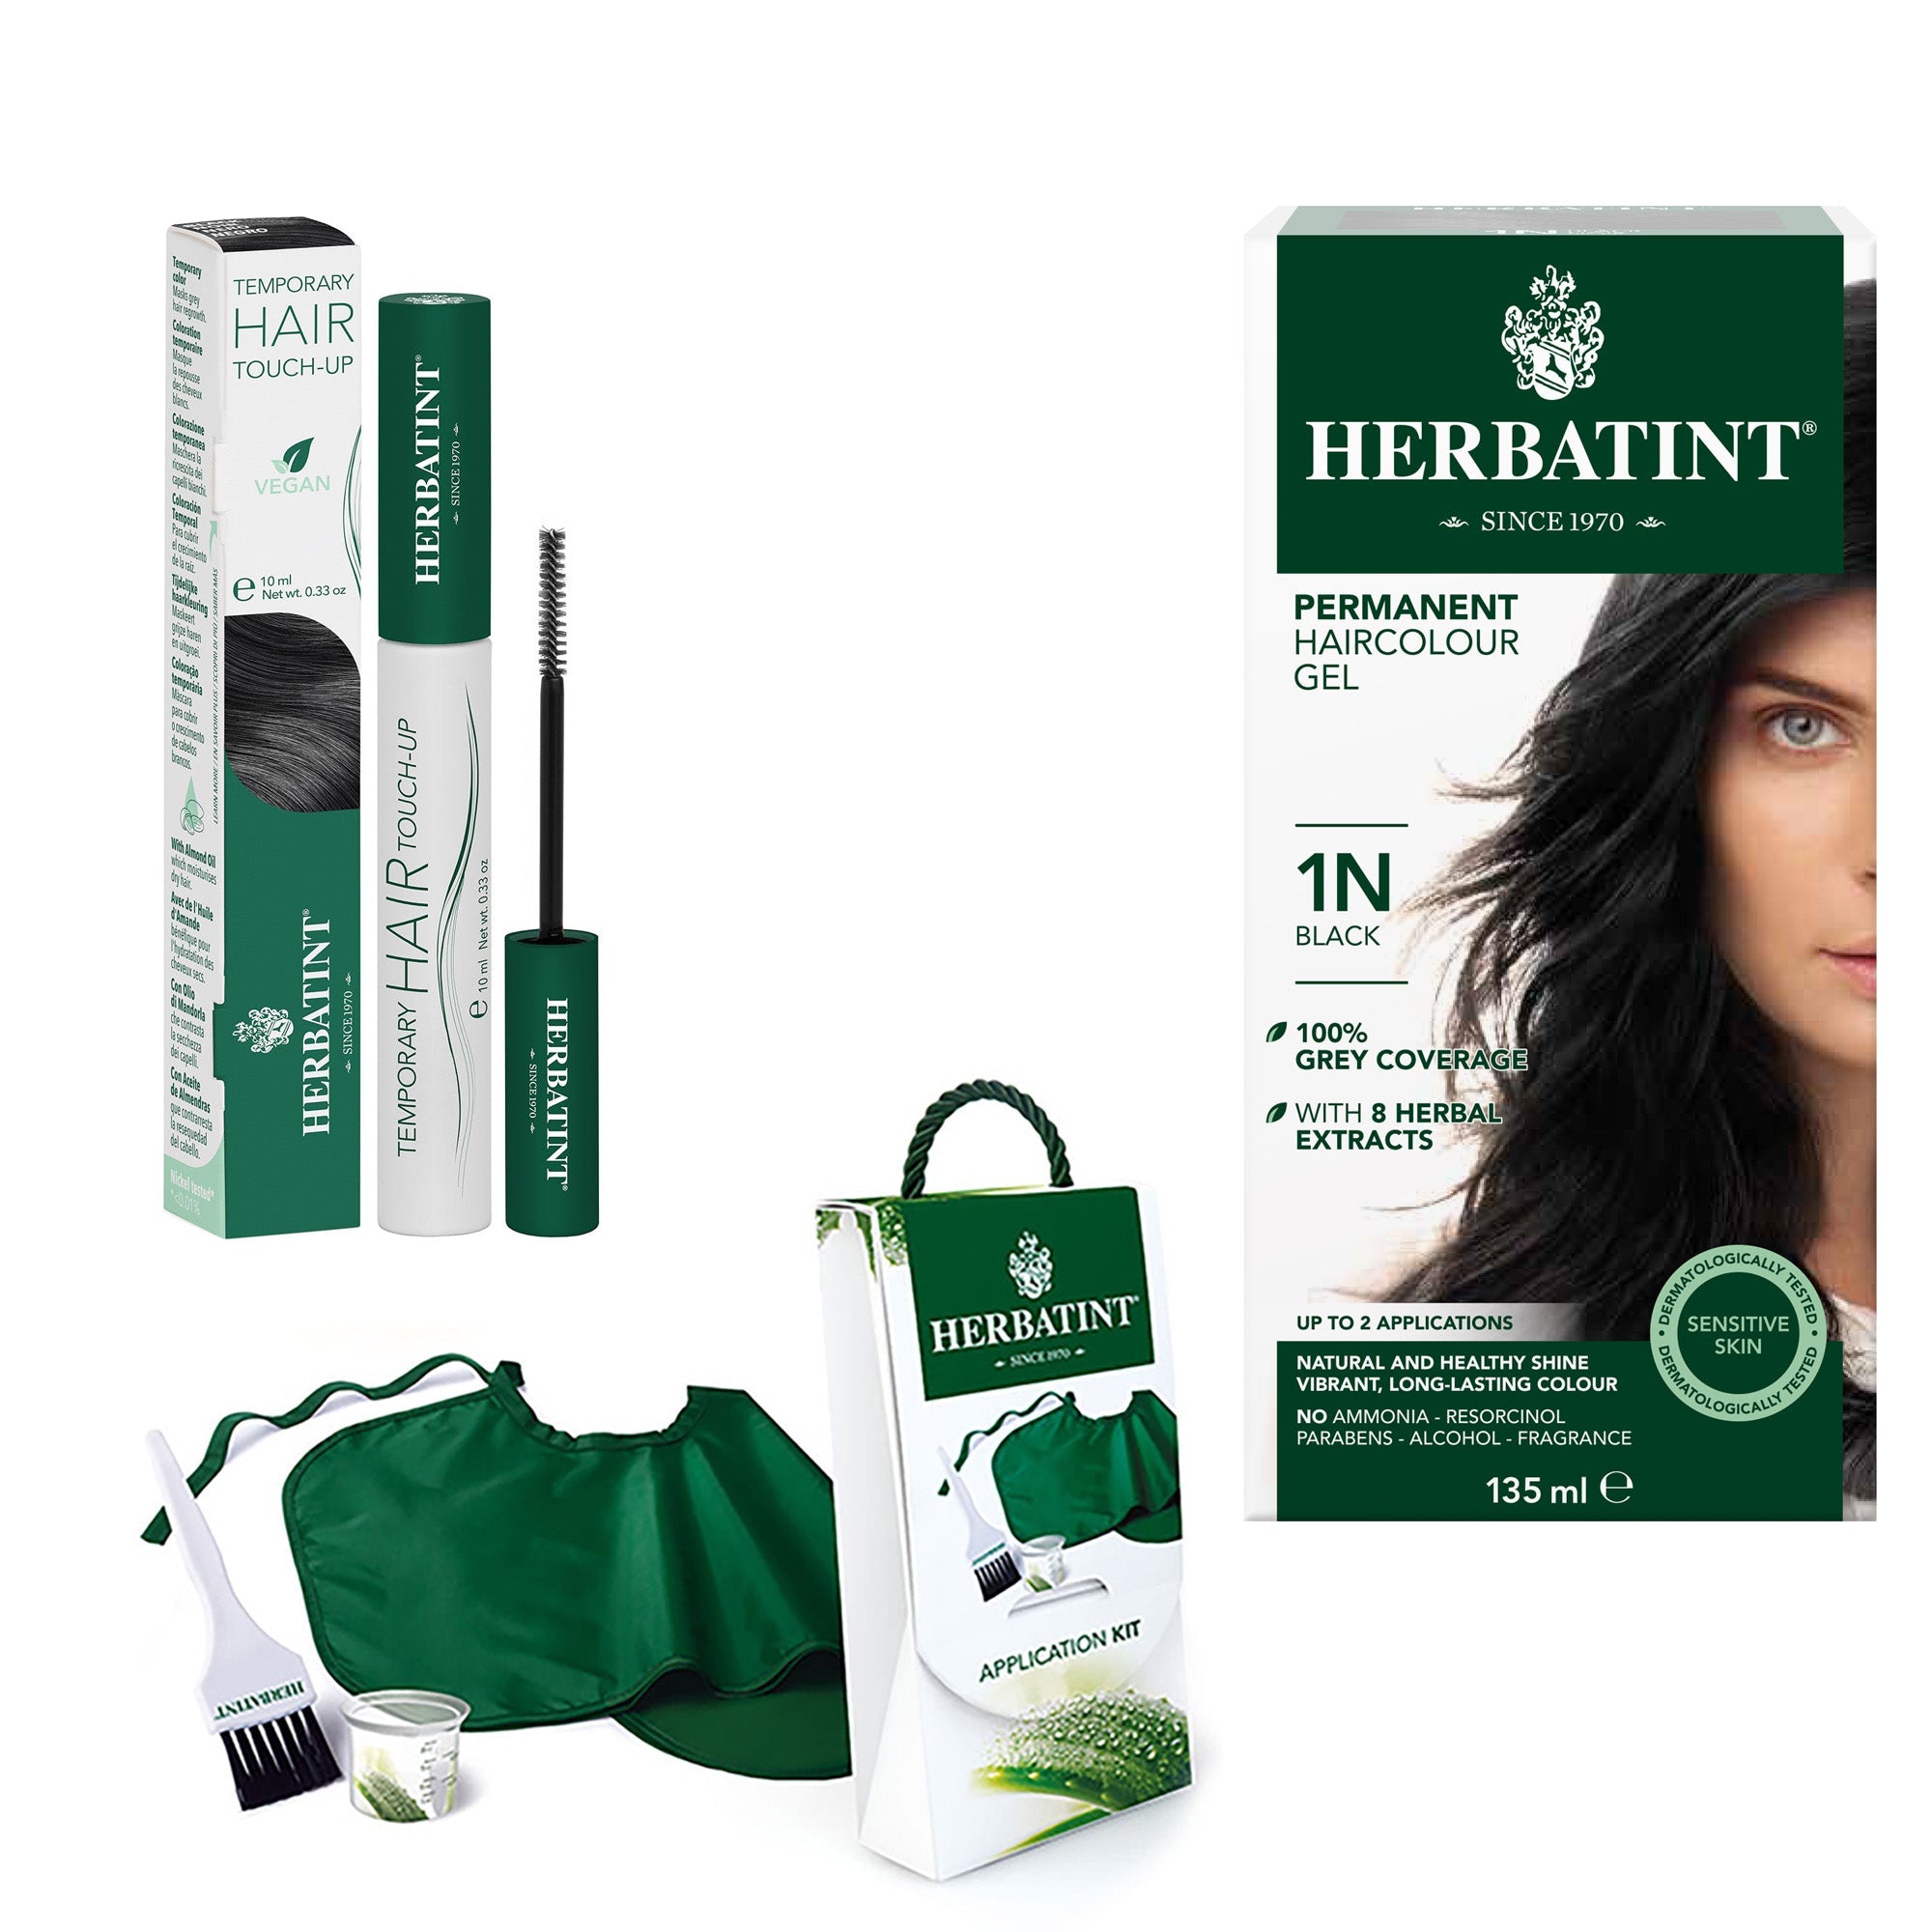 Black Permanent Haircolour Gel, Root Touch-up and application Kit Value Bundle - A.Vogel Canada